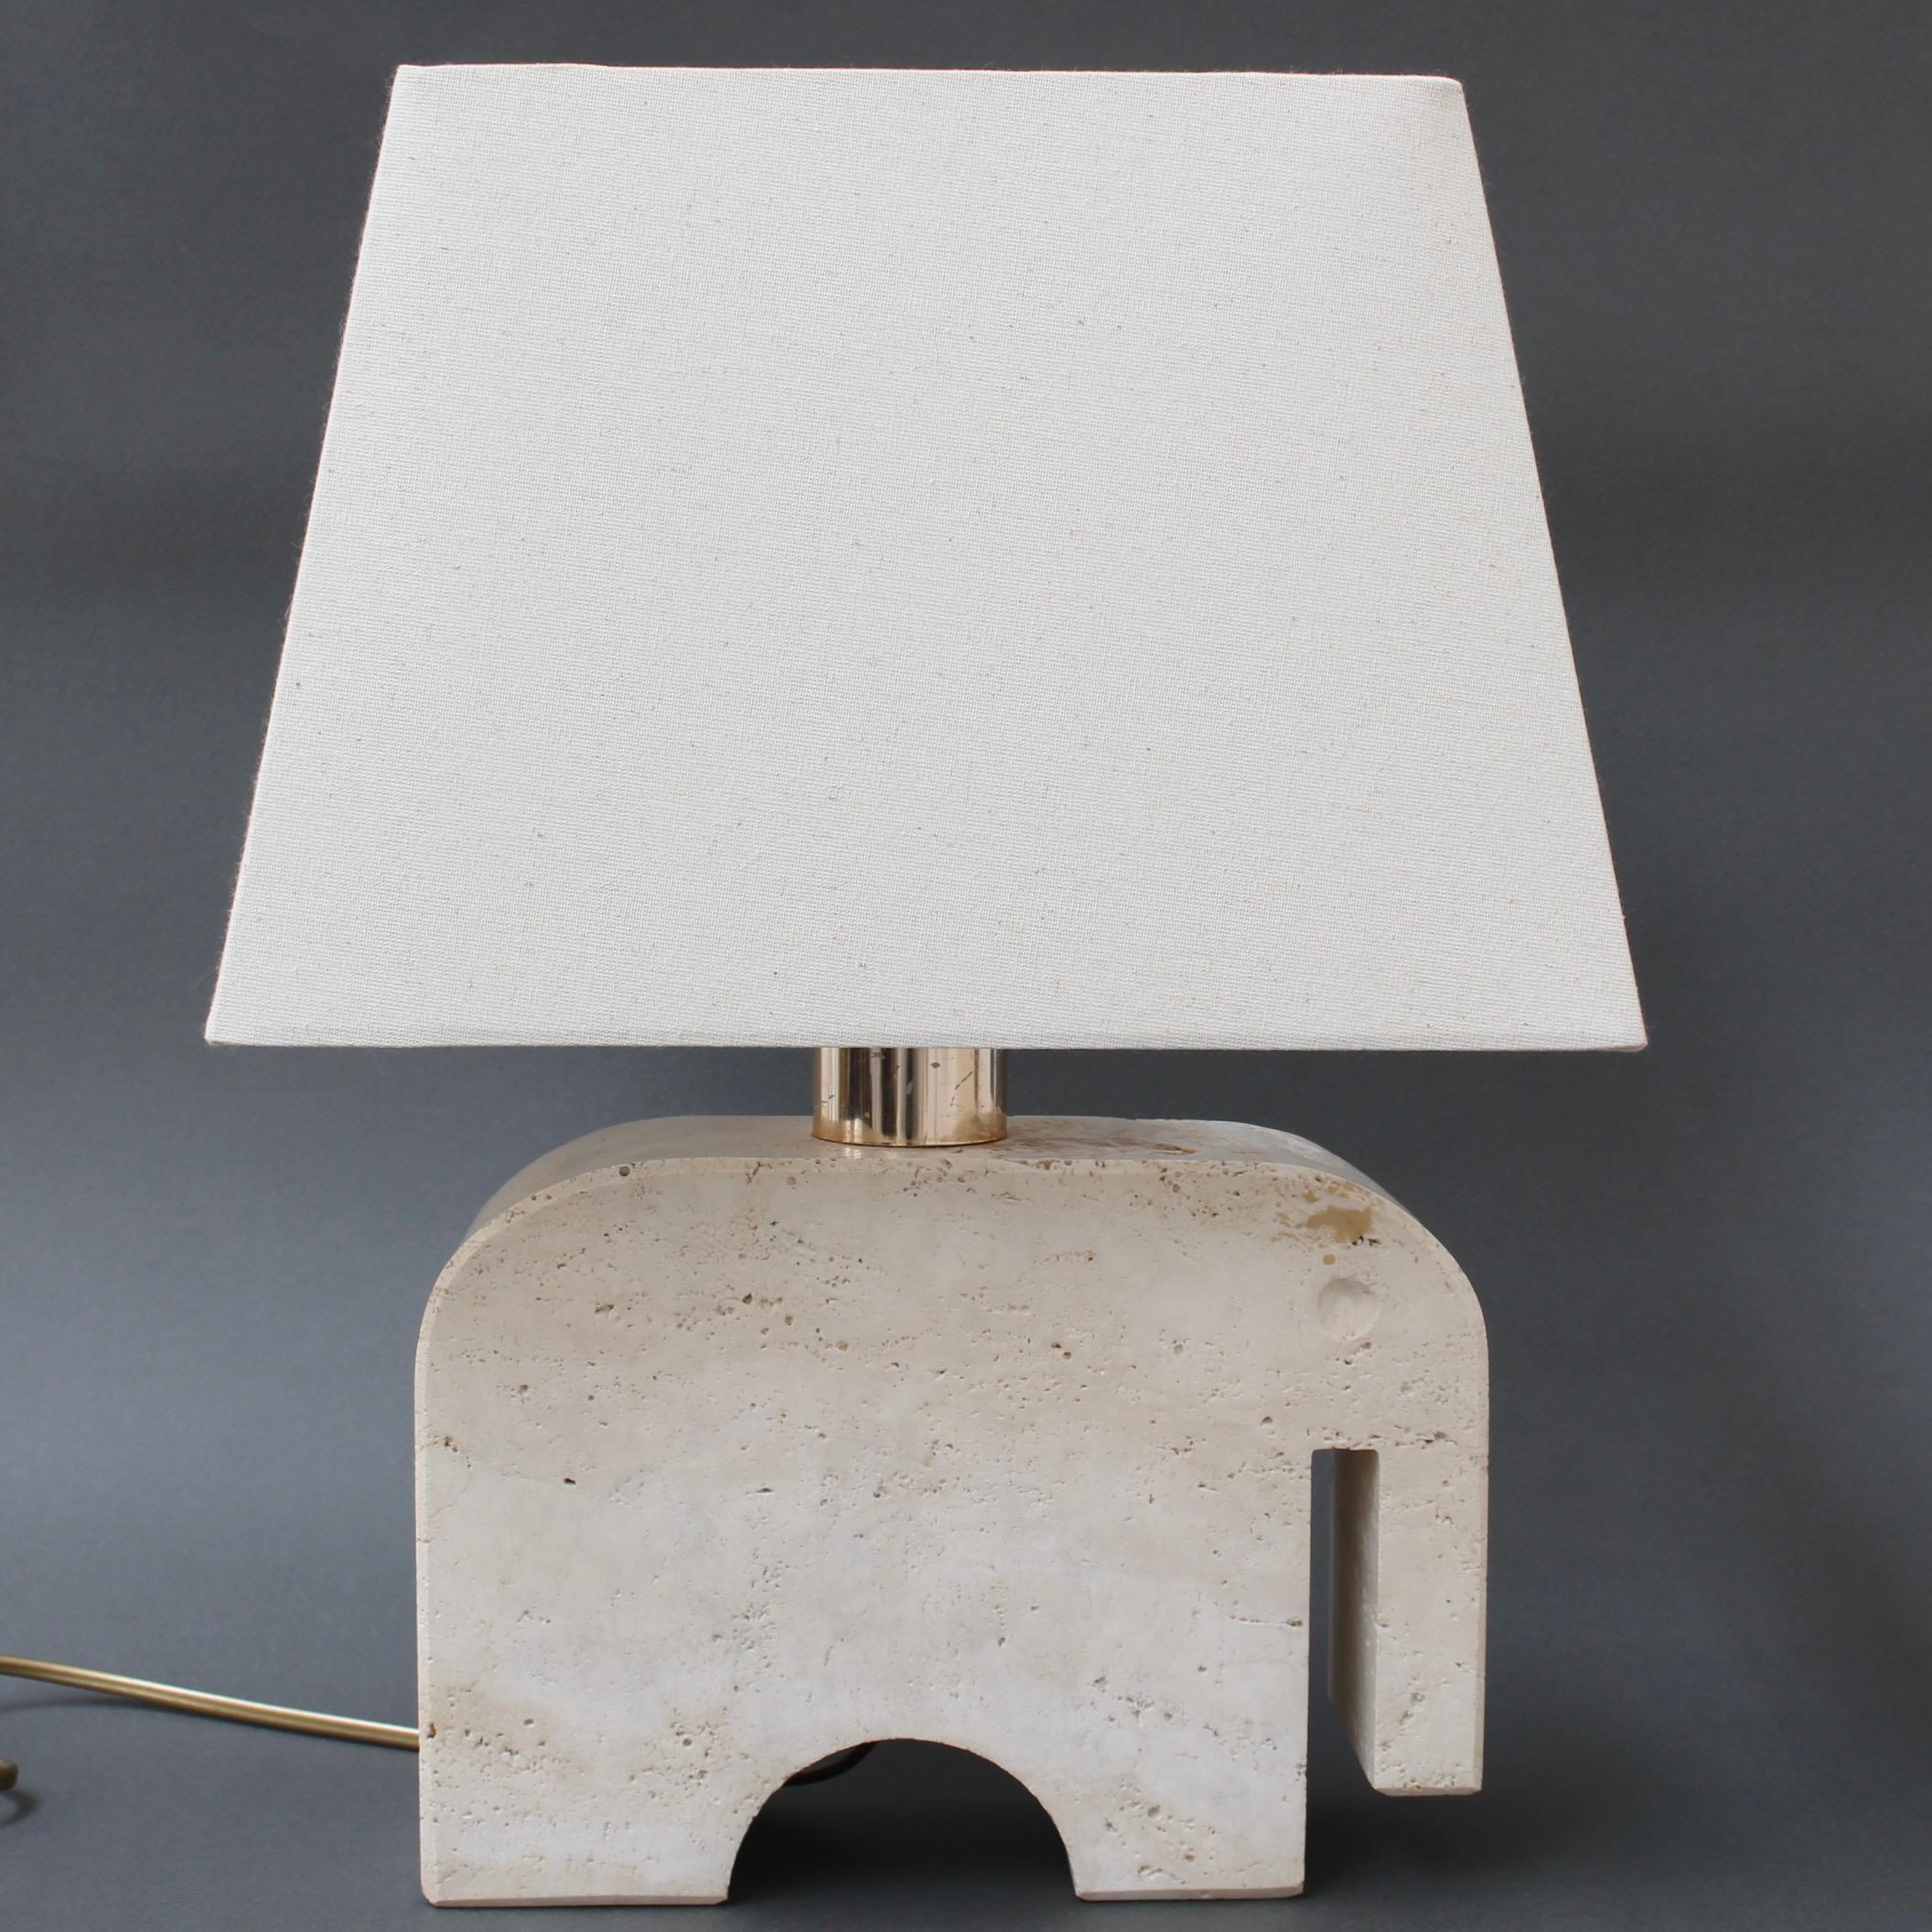 A vintage travertine whimsical elephant table lamp by Mannelli Bros., Florence, Italy (circa 1970s). A joyful, real travertine stylised elephant will delight art lovers and collectors and provide lighting at the same time! Minimalist in style with